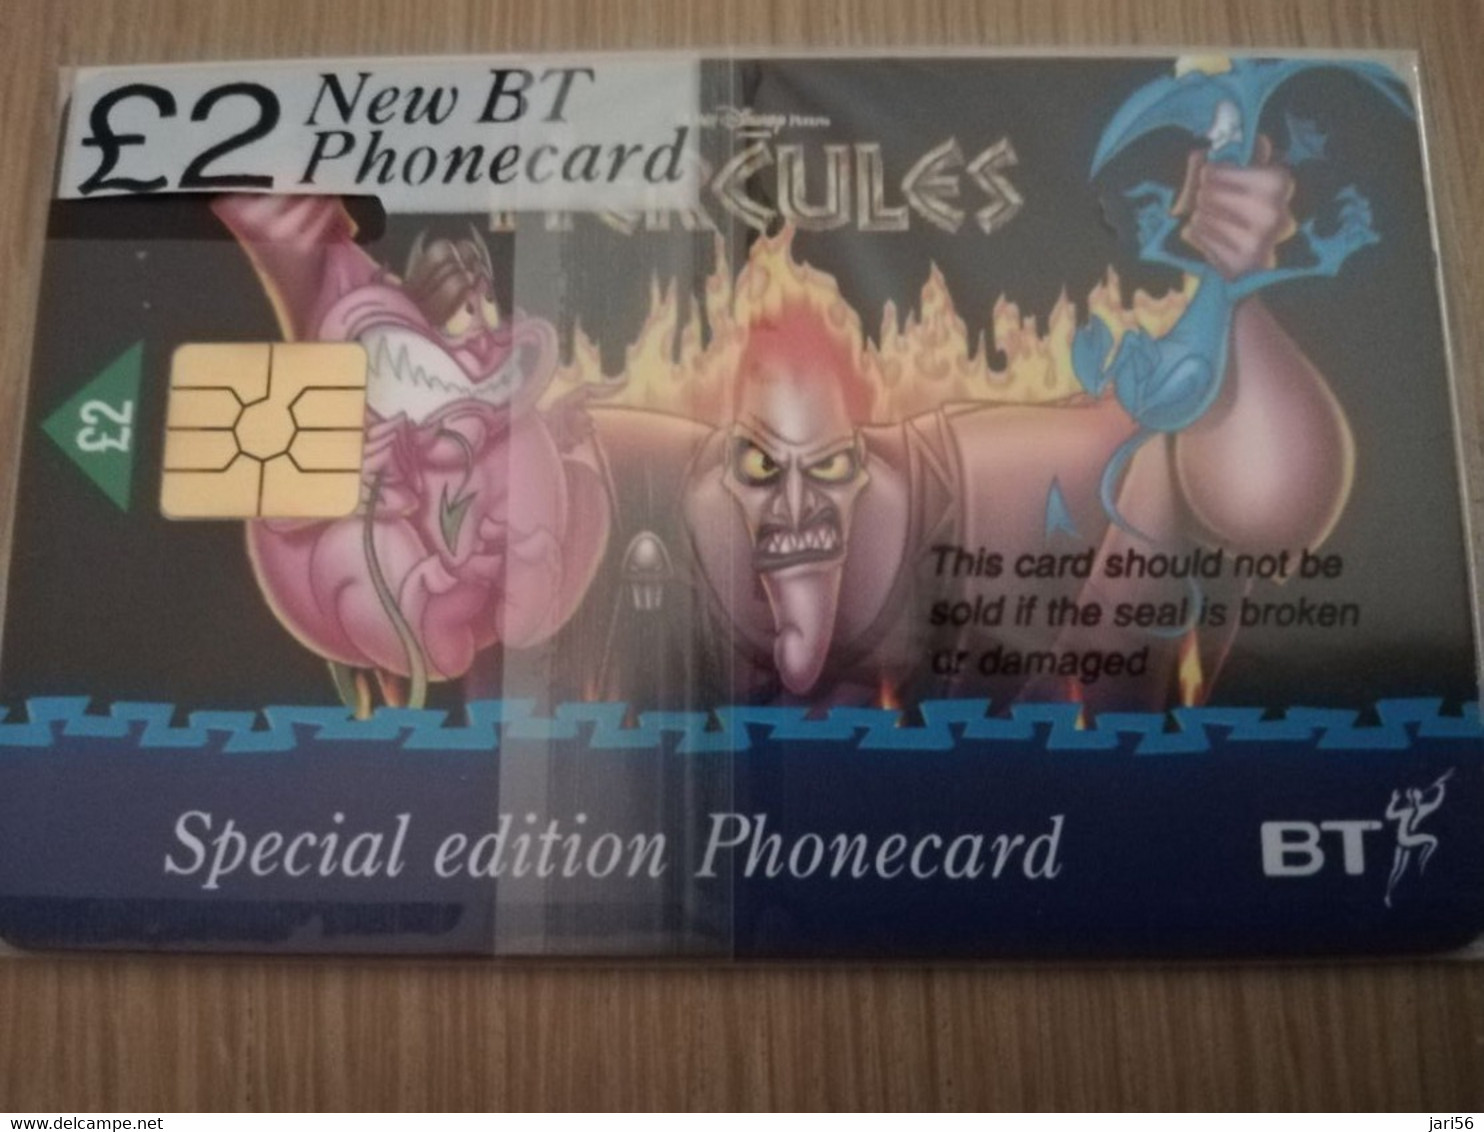 GREAT BRETAGNE  CHIPCARDS HERCULES/ DISNEY  SERIE 6X 2 POUND Sealed In Wrapper    MINT CONDITION      **3856** - BT Général